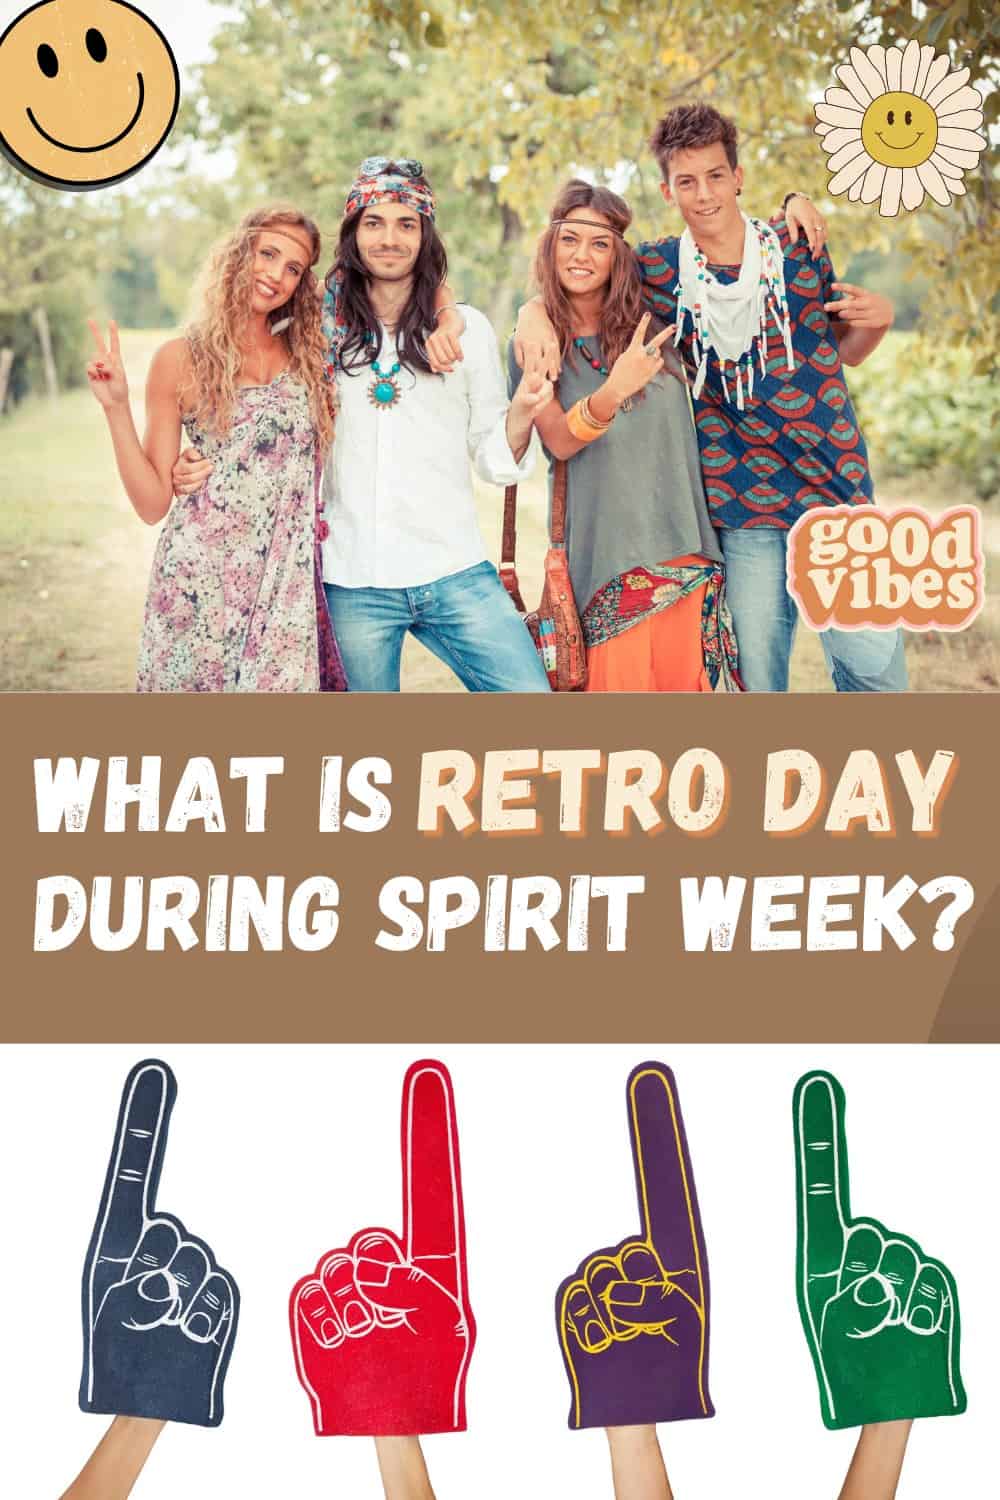 Retro Day is a dedicated day of celebration during Spirit Week